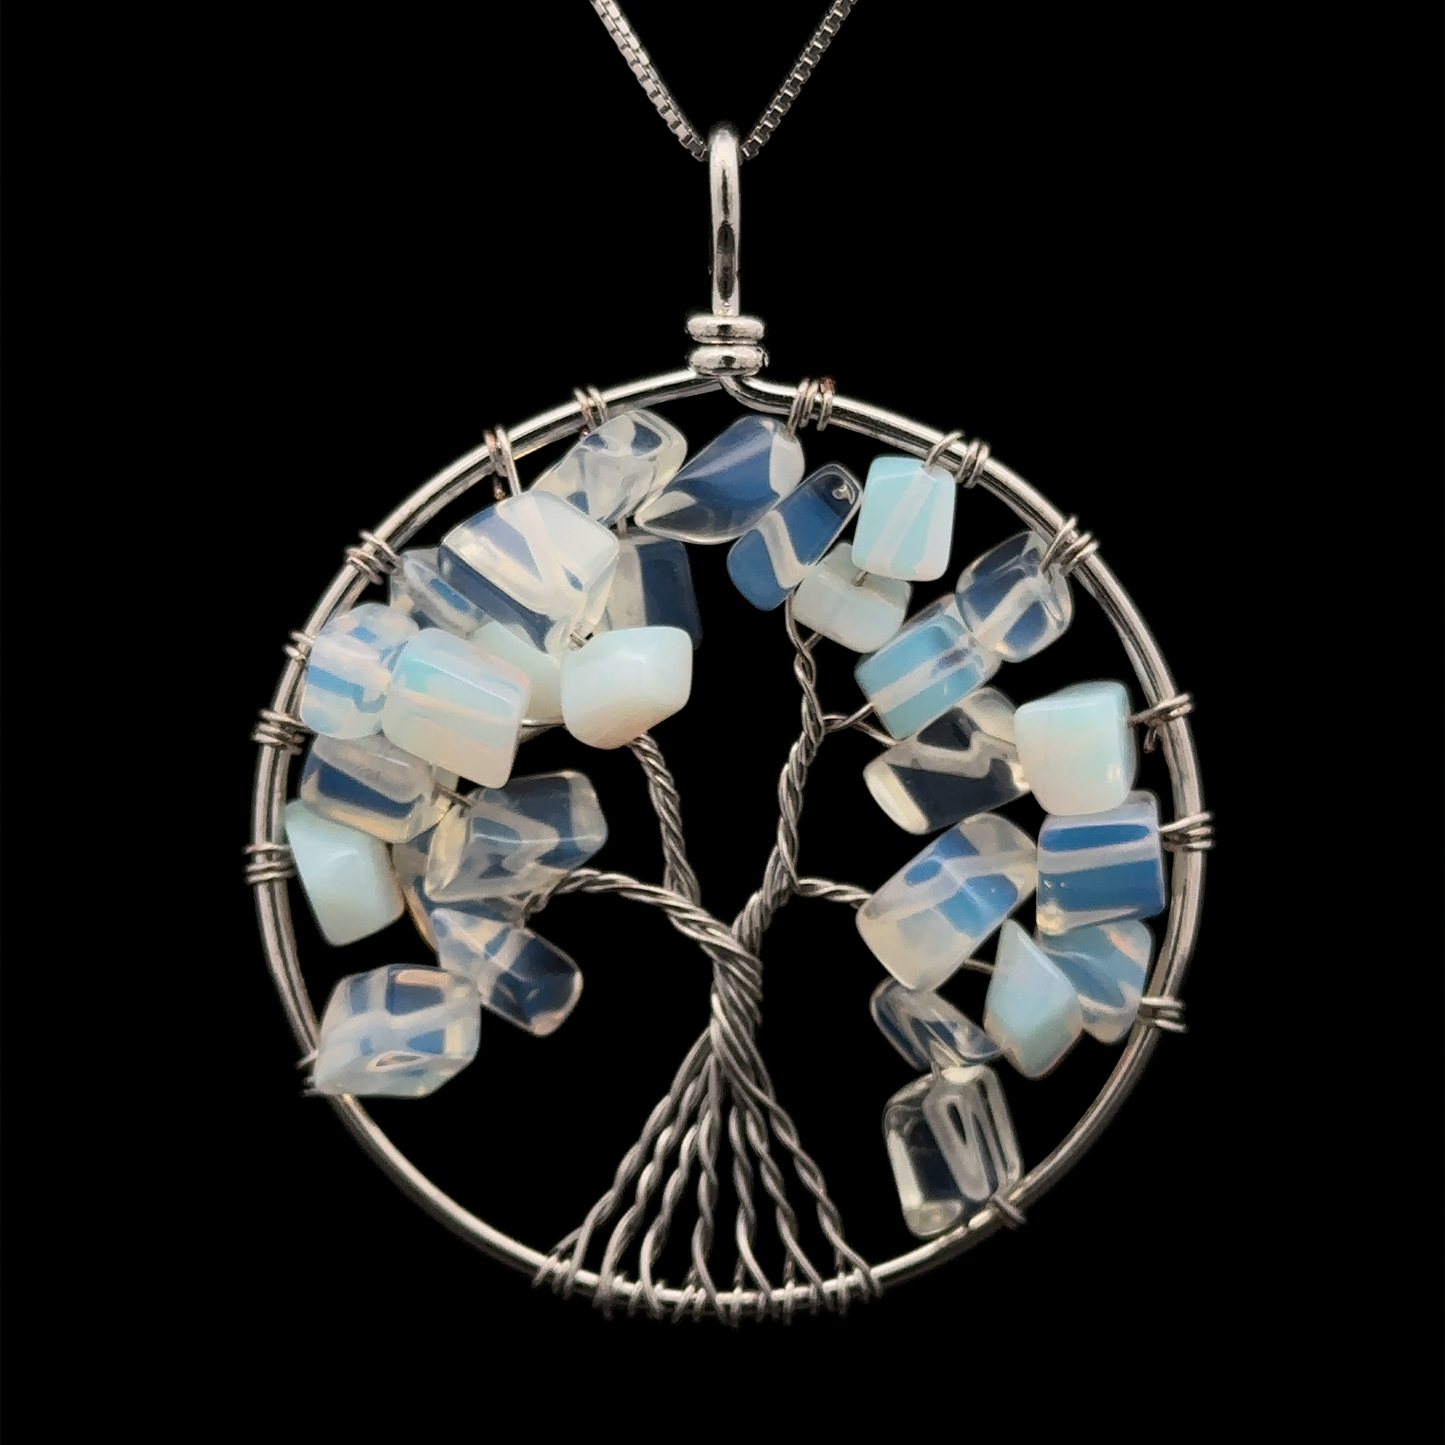 
                  
                    A Wire Wrapped Tree of Life Pendant featuring a tree made from twisted wire with blue and white gemstone chips, set in a circular mixed metals frame on a dark background.
                  
                